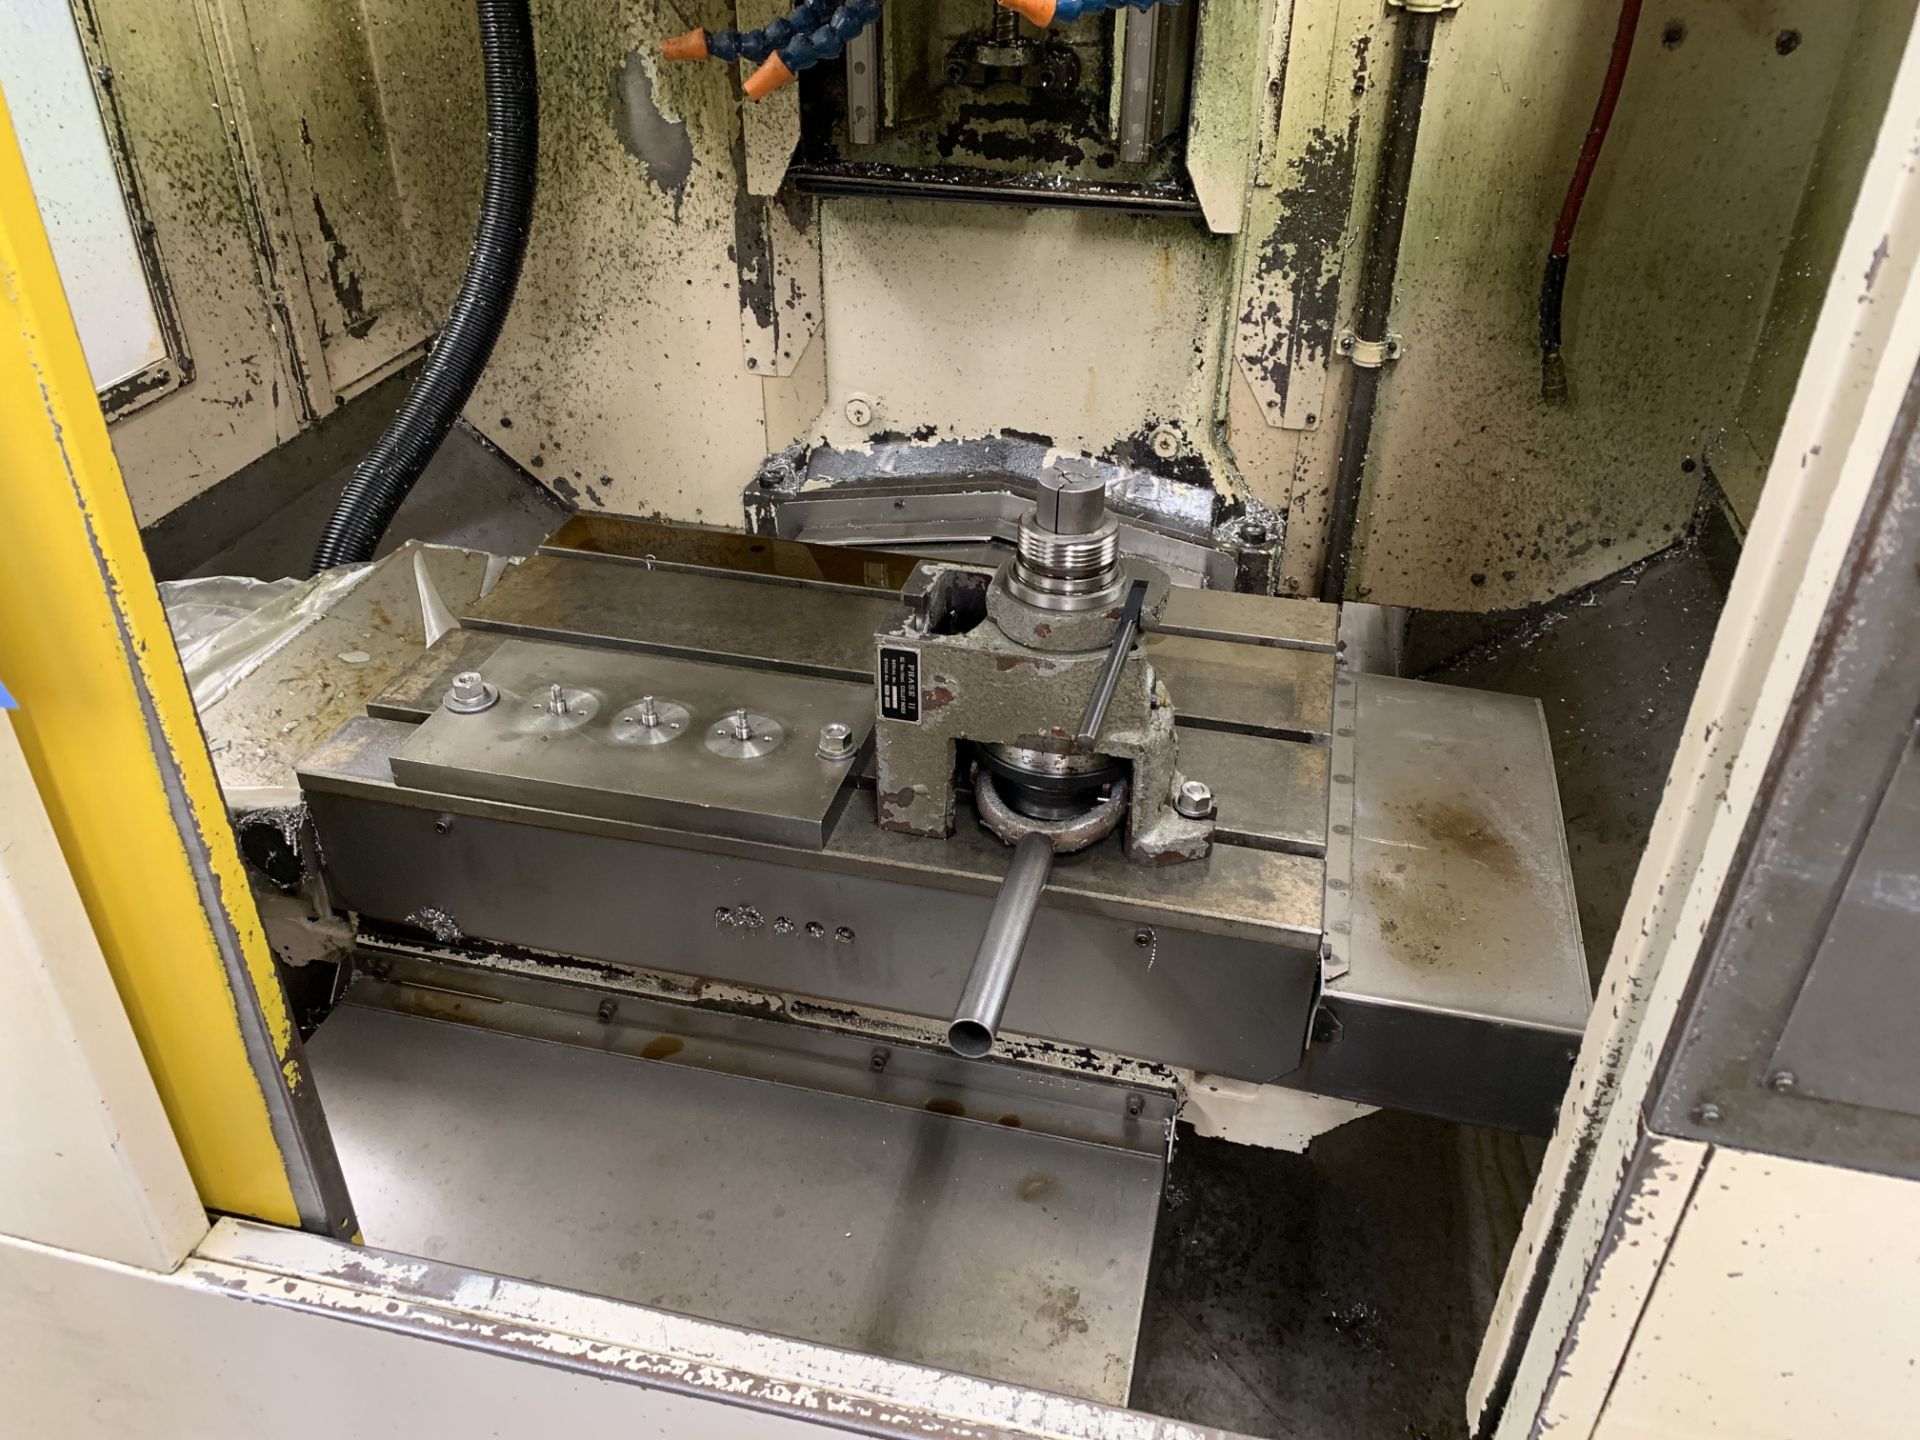 FANUC MODEL ROBODRILL ALPHA T14iB CNC DRILL AND TAPPING CENTER; S/N P014TL112, FANUC 16i-M - Image 3 of 9